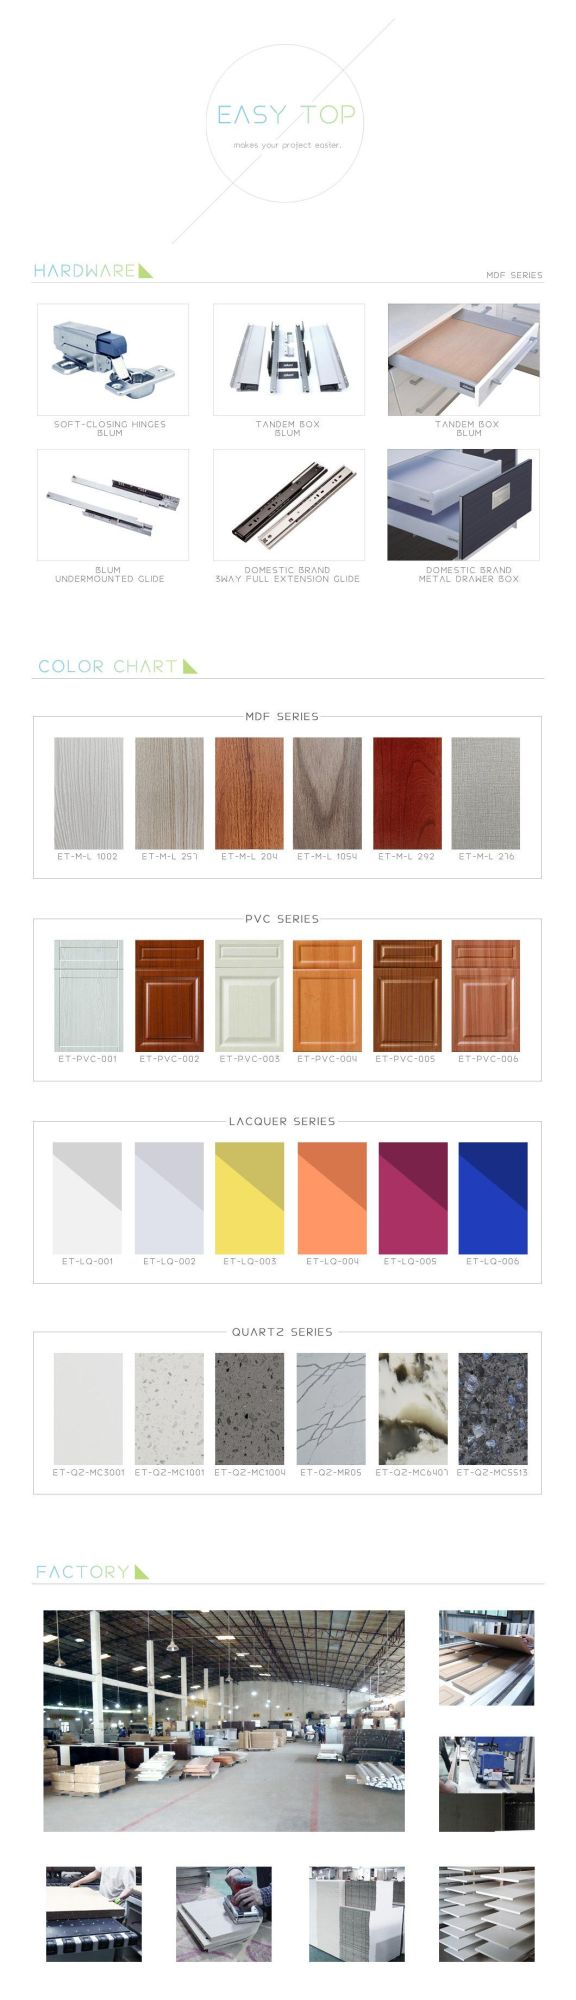 Double Door Cabinet Linear Style Gery Shaker Joinery Edge Strip Open Shelf Classic Kitchen Cabinets